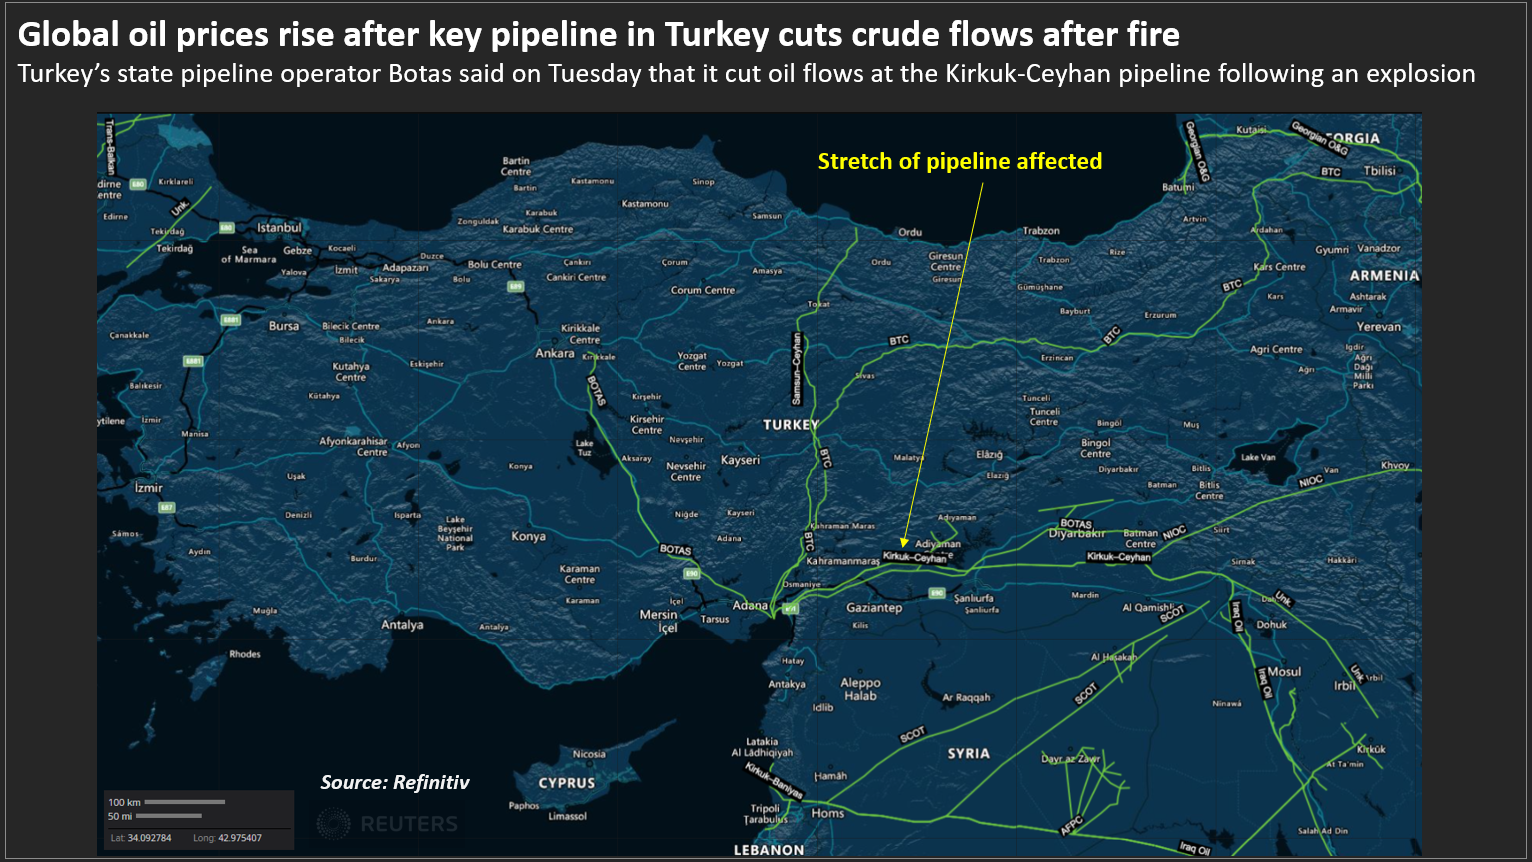 Global oil prices rise after key pipeline in Turkey cuts crude flows after fire